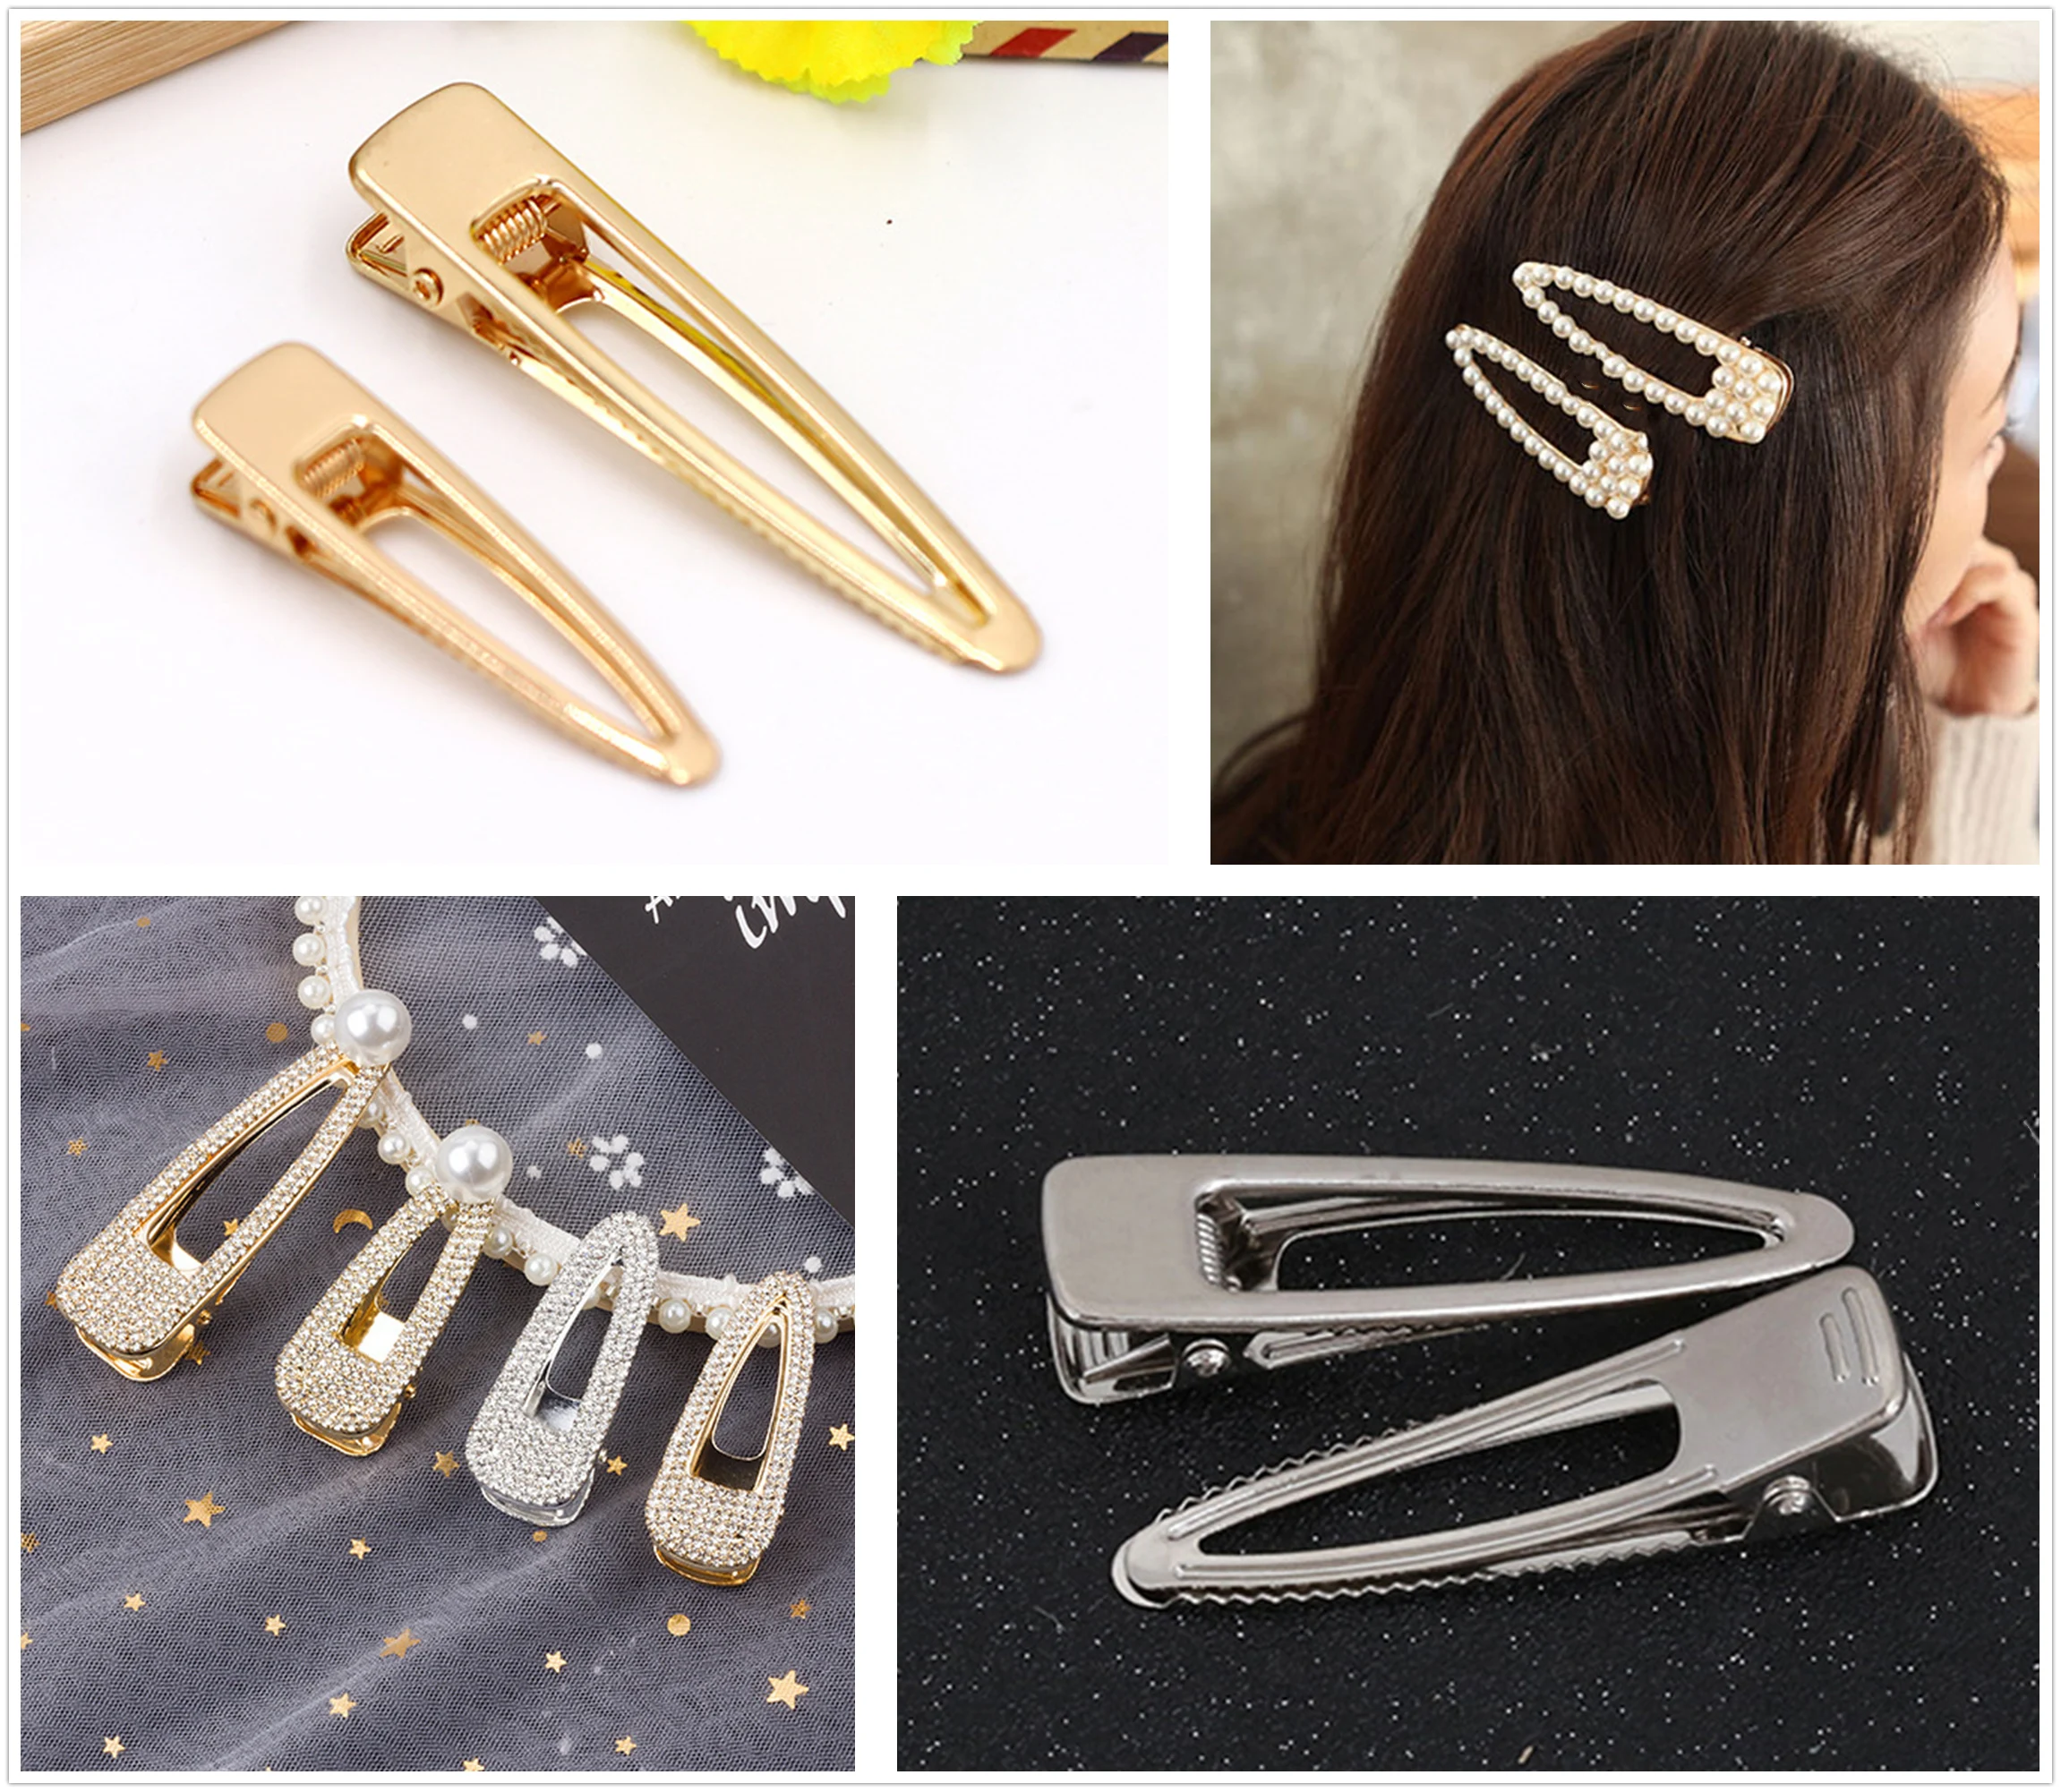 20pcs gold/rhodium Hair Clips Fashion square Hairpin Blank Base for Diy Jewelry Making Pearl Hair Clip Setting craft supplie